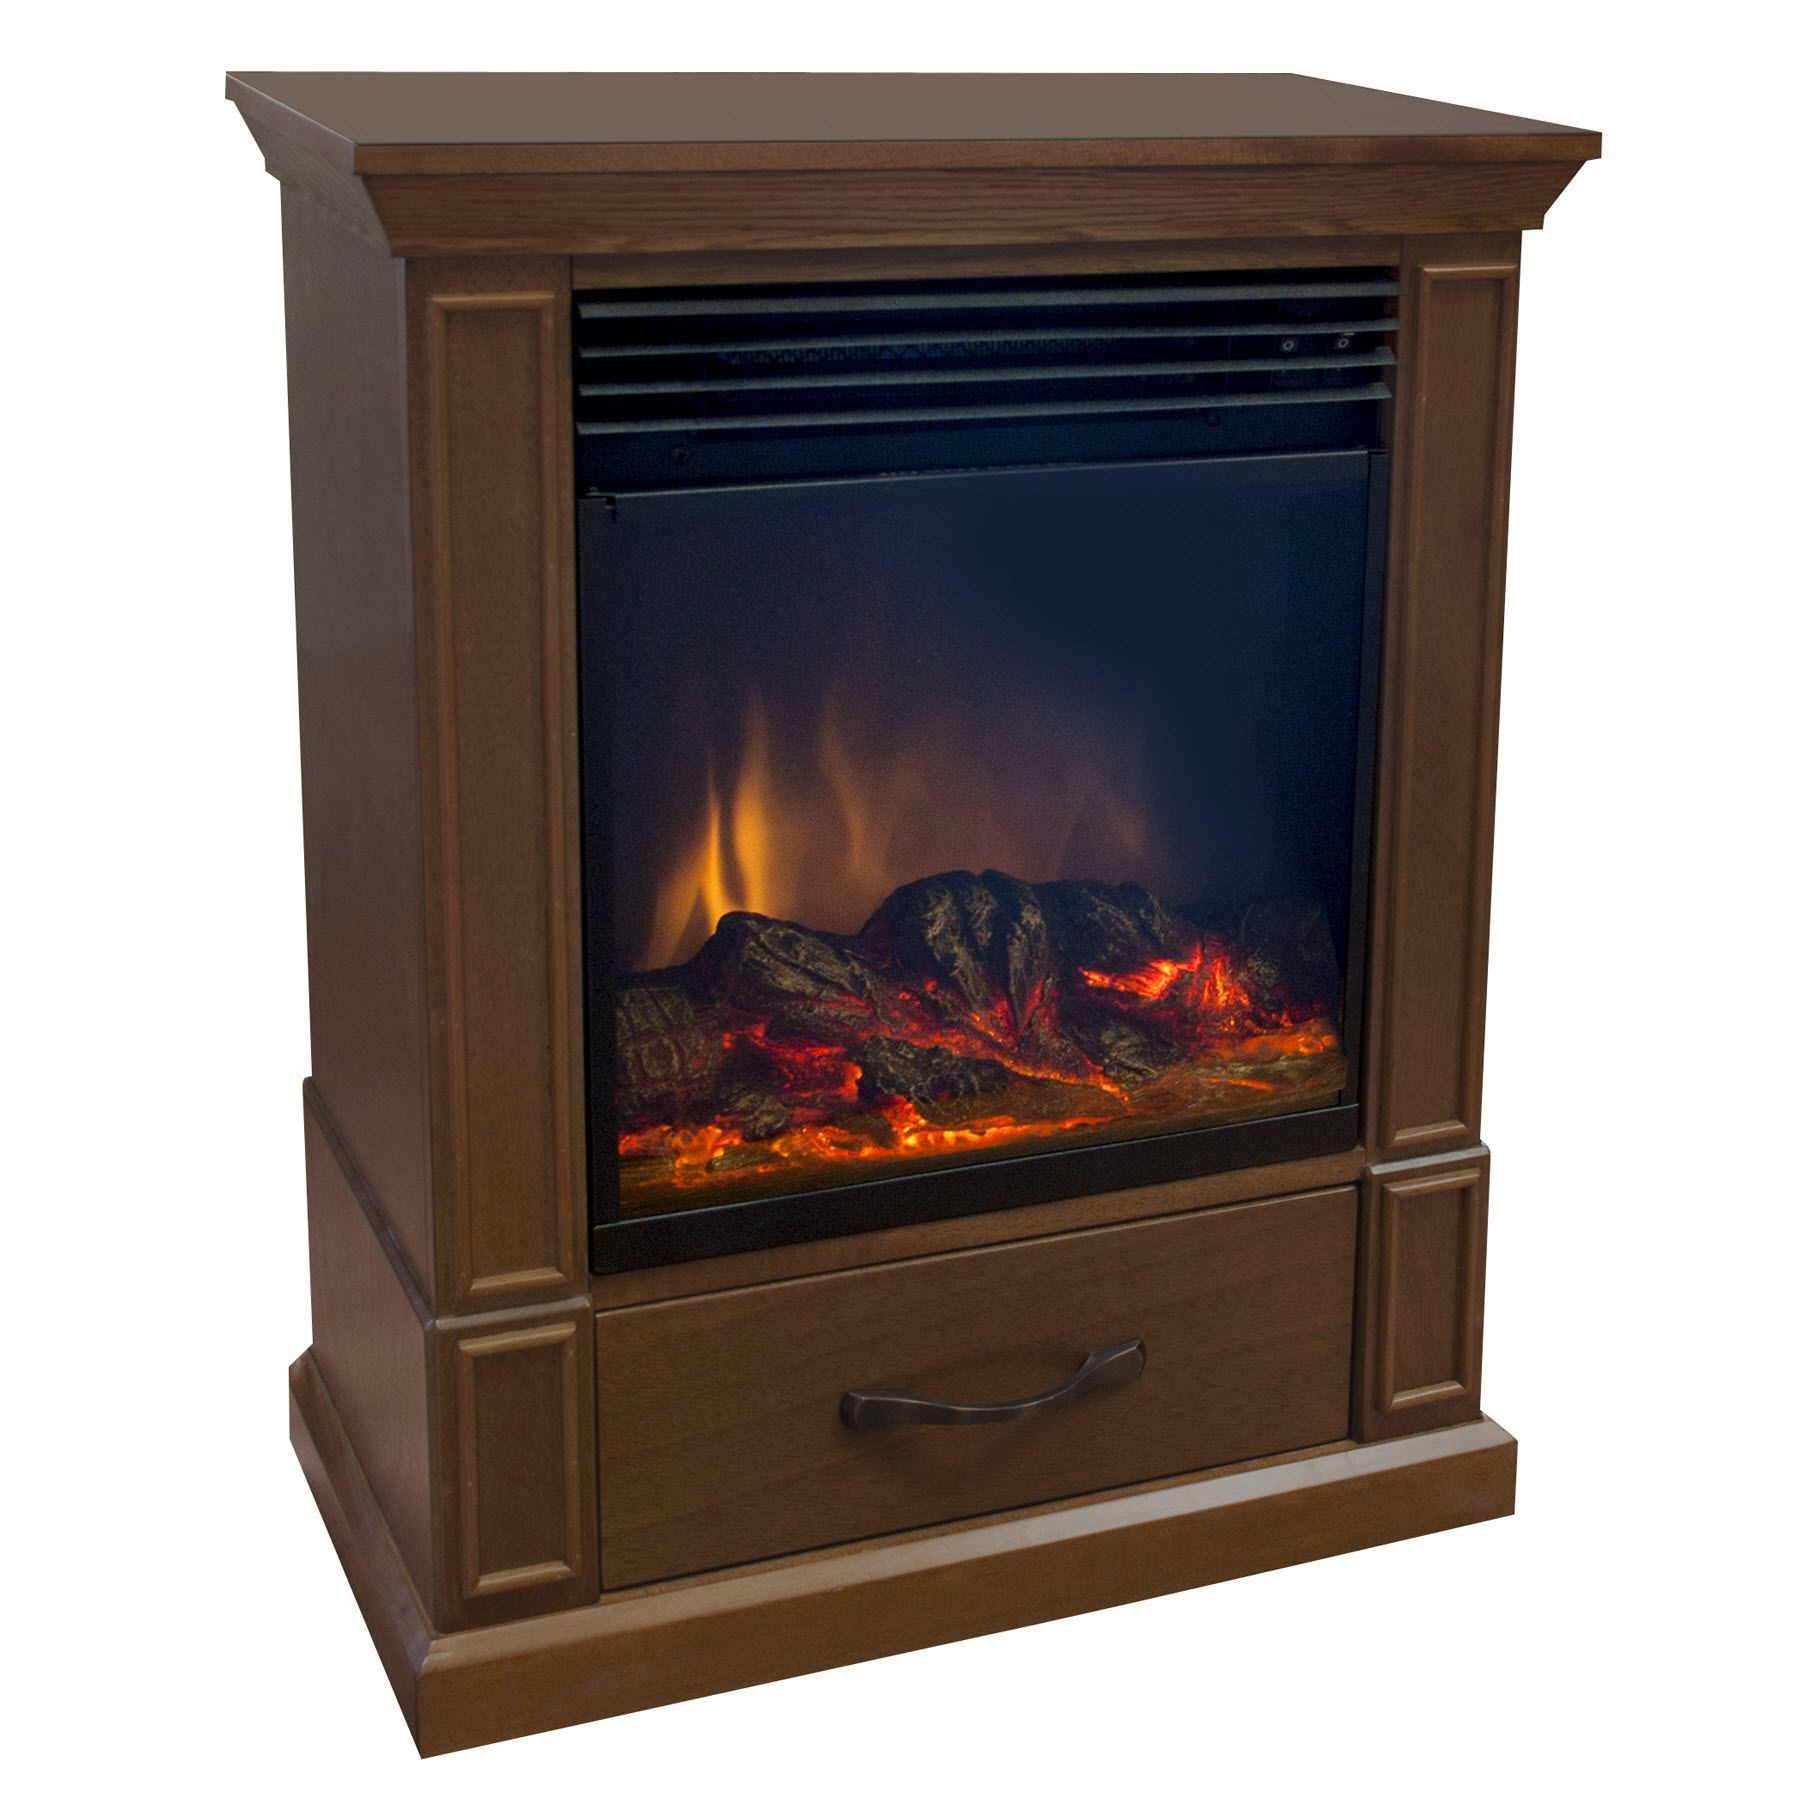 Electric Fireplace Sears
 20 Mobile Electric Fireplace Easy Home Upgrades from Sears